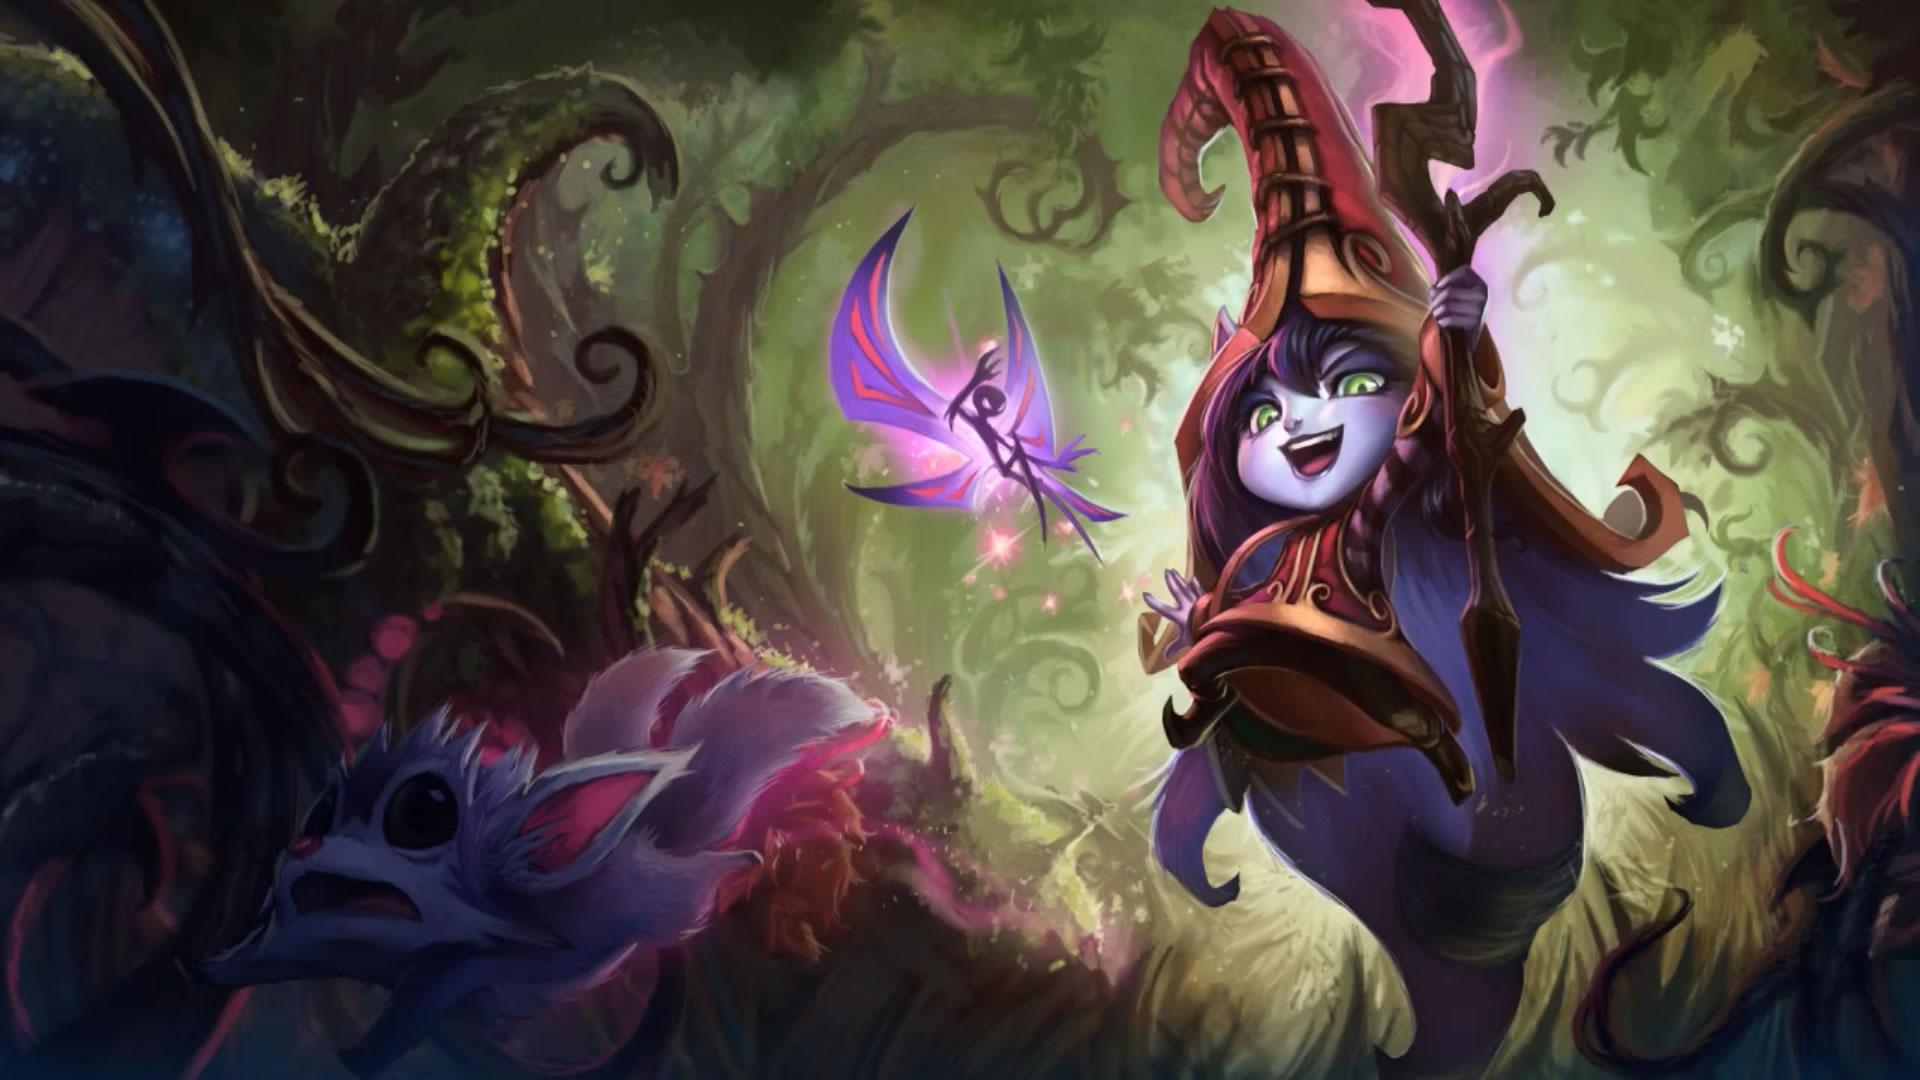 Lulu Background Image In Collection